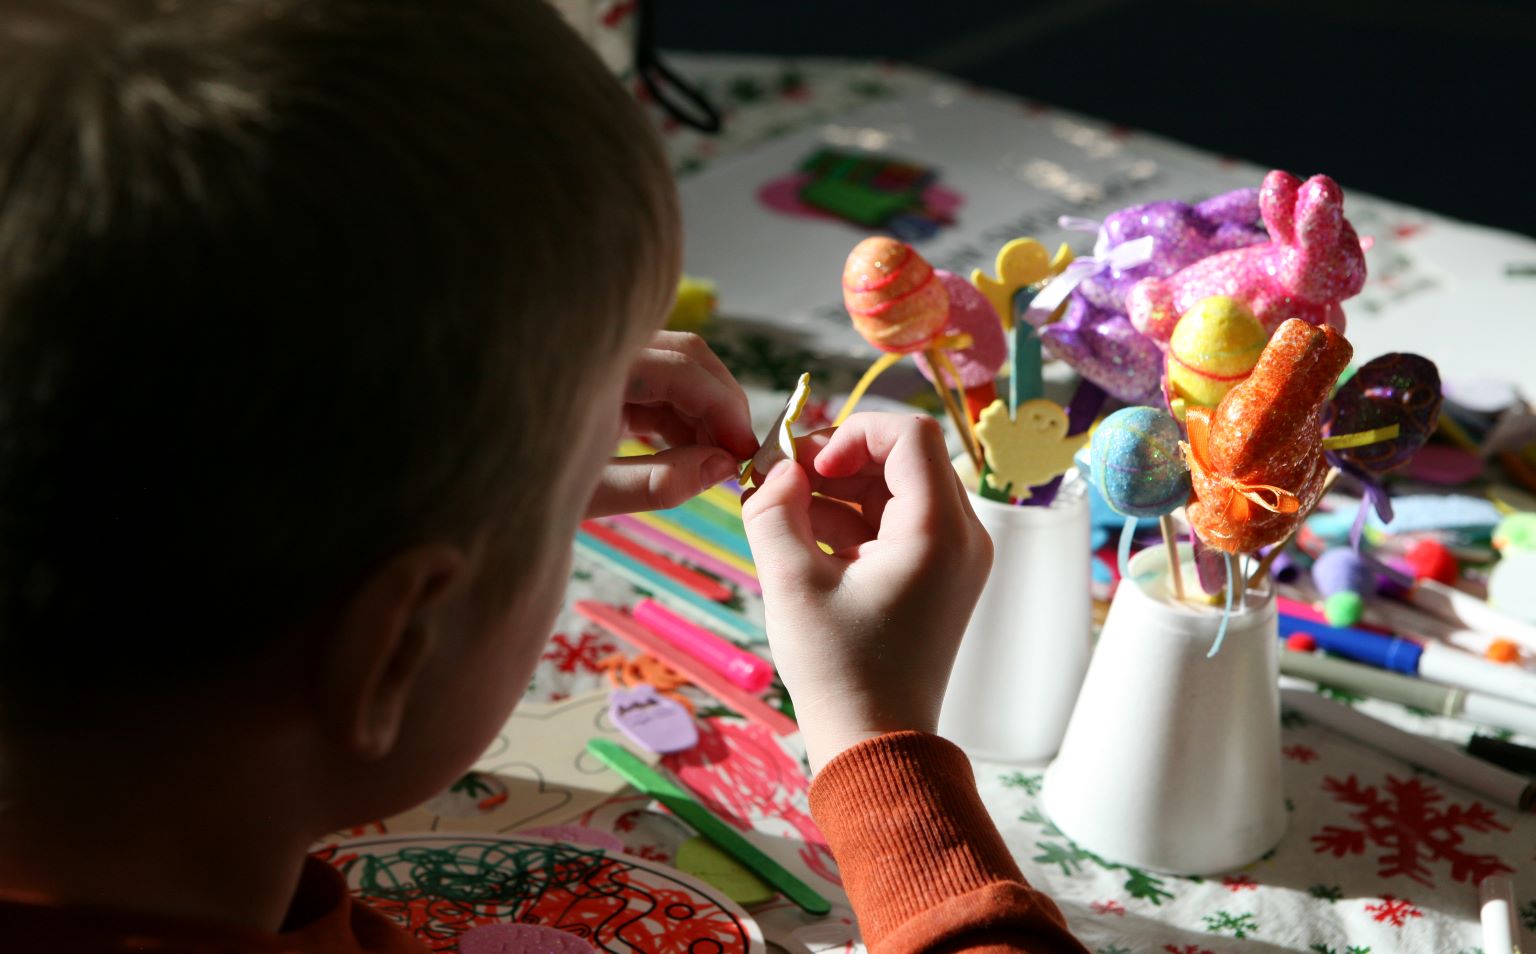 A child is sitting at a table which has easter arts and drafts on it. He is facing away from the camera and he is pealing the back off a sticker to decorate a paper plate.